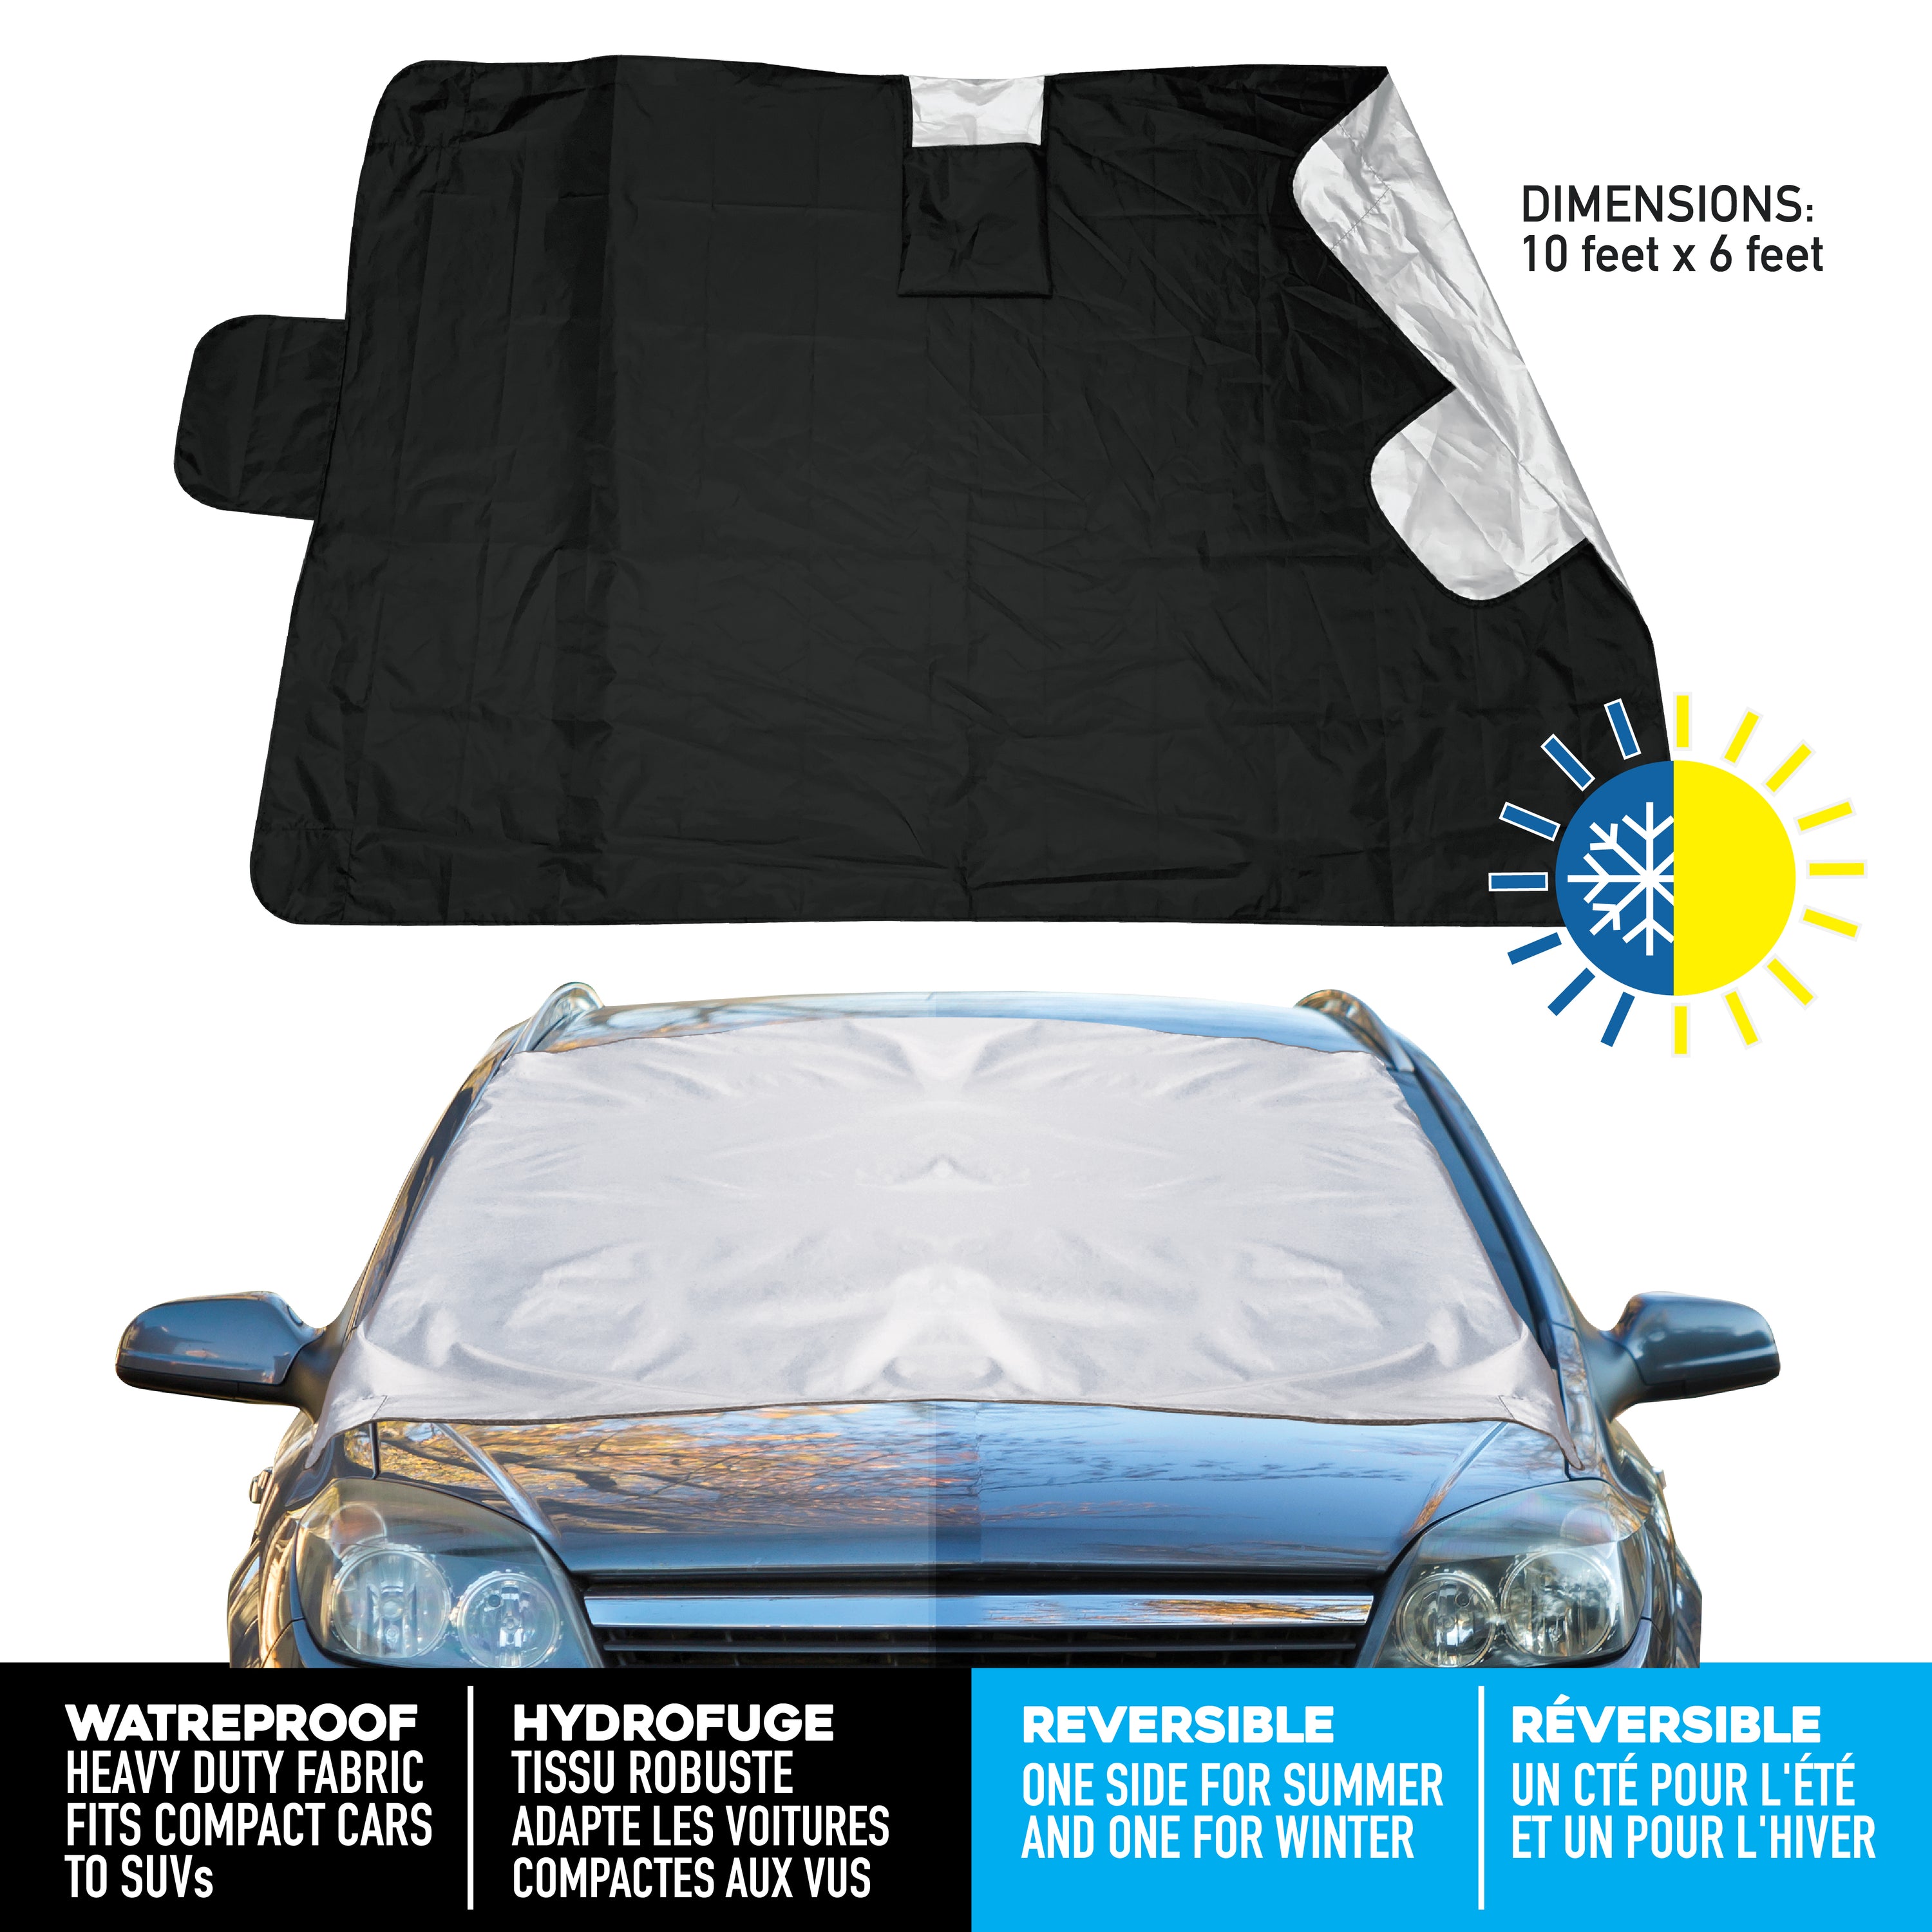 Weatherforce 360  All-Weather Sunshade Ice Cover Heavy Duty Reversible Windshield Protector 6 by 10 feet Fabric For Any Car Protects from Heat & Snow with Anti-Theft Panels As Seen On TV